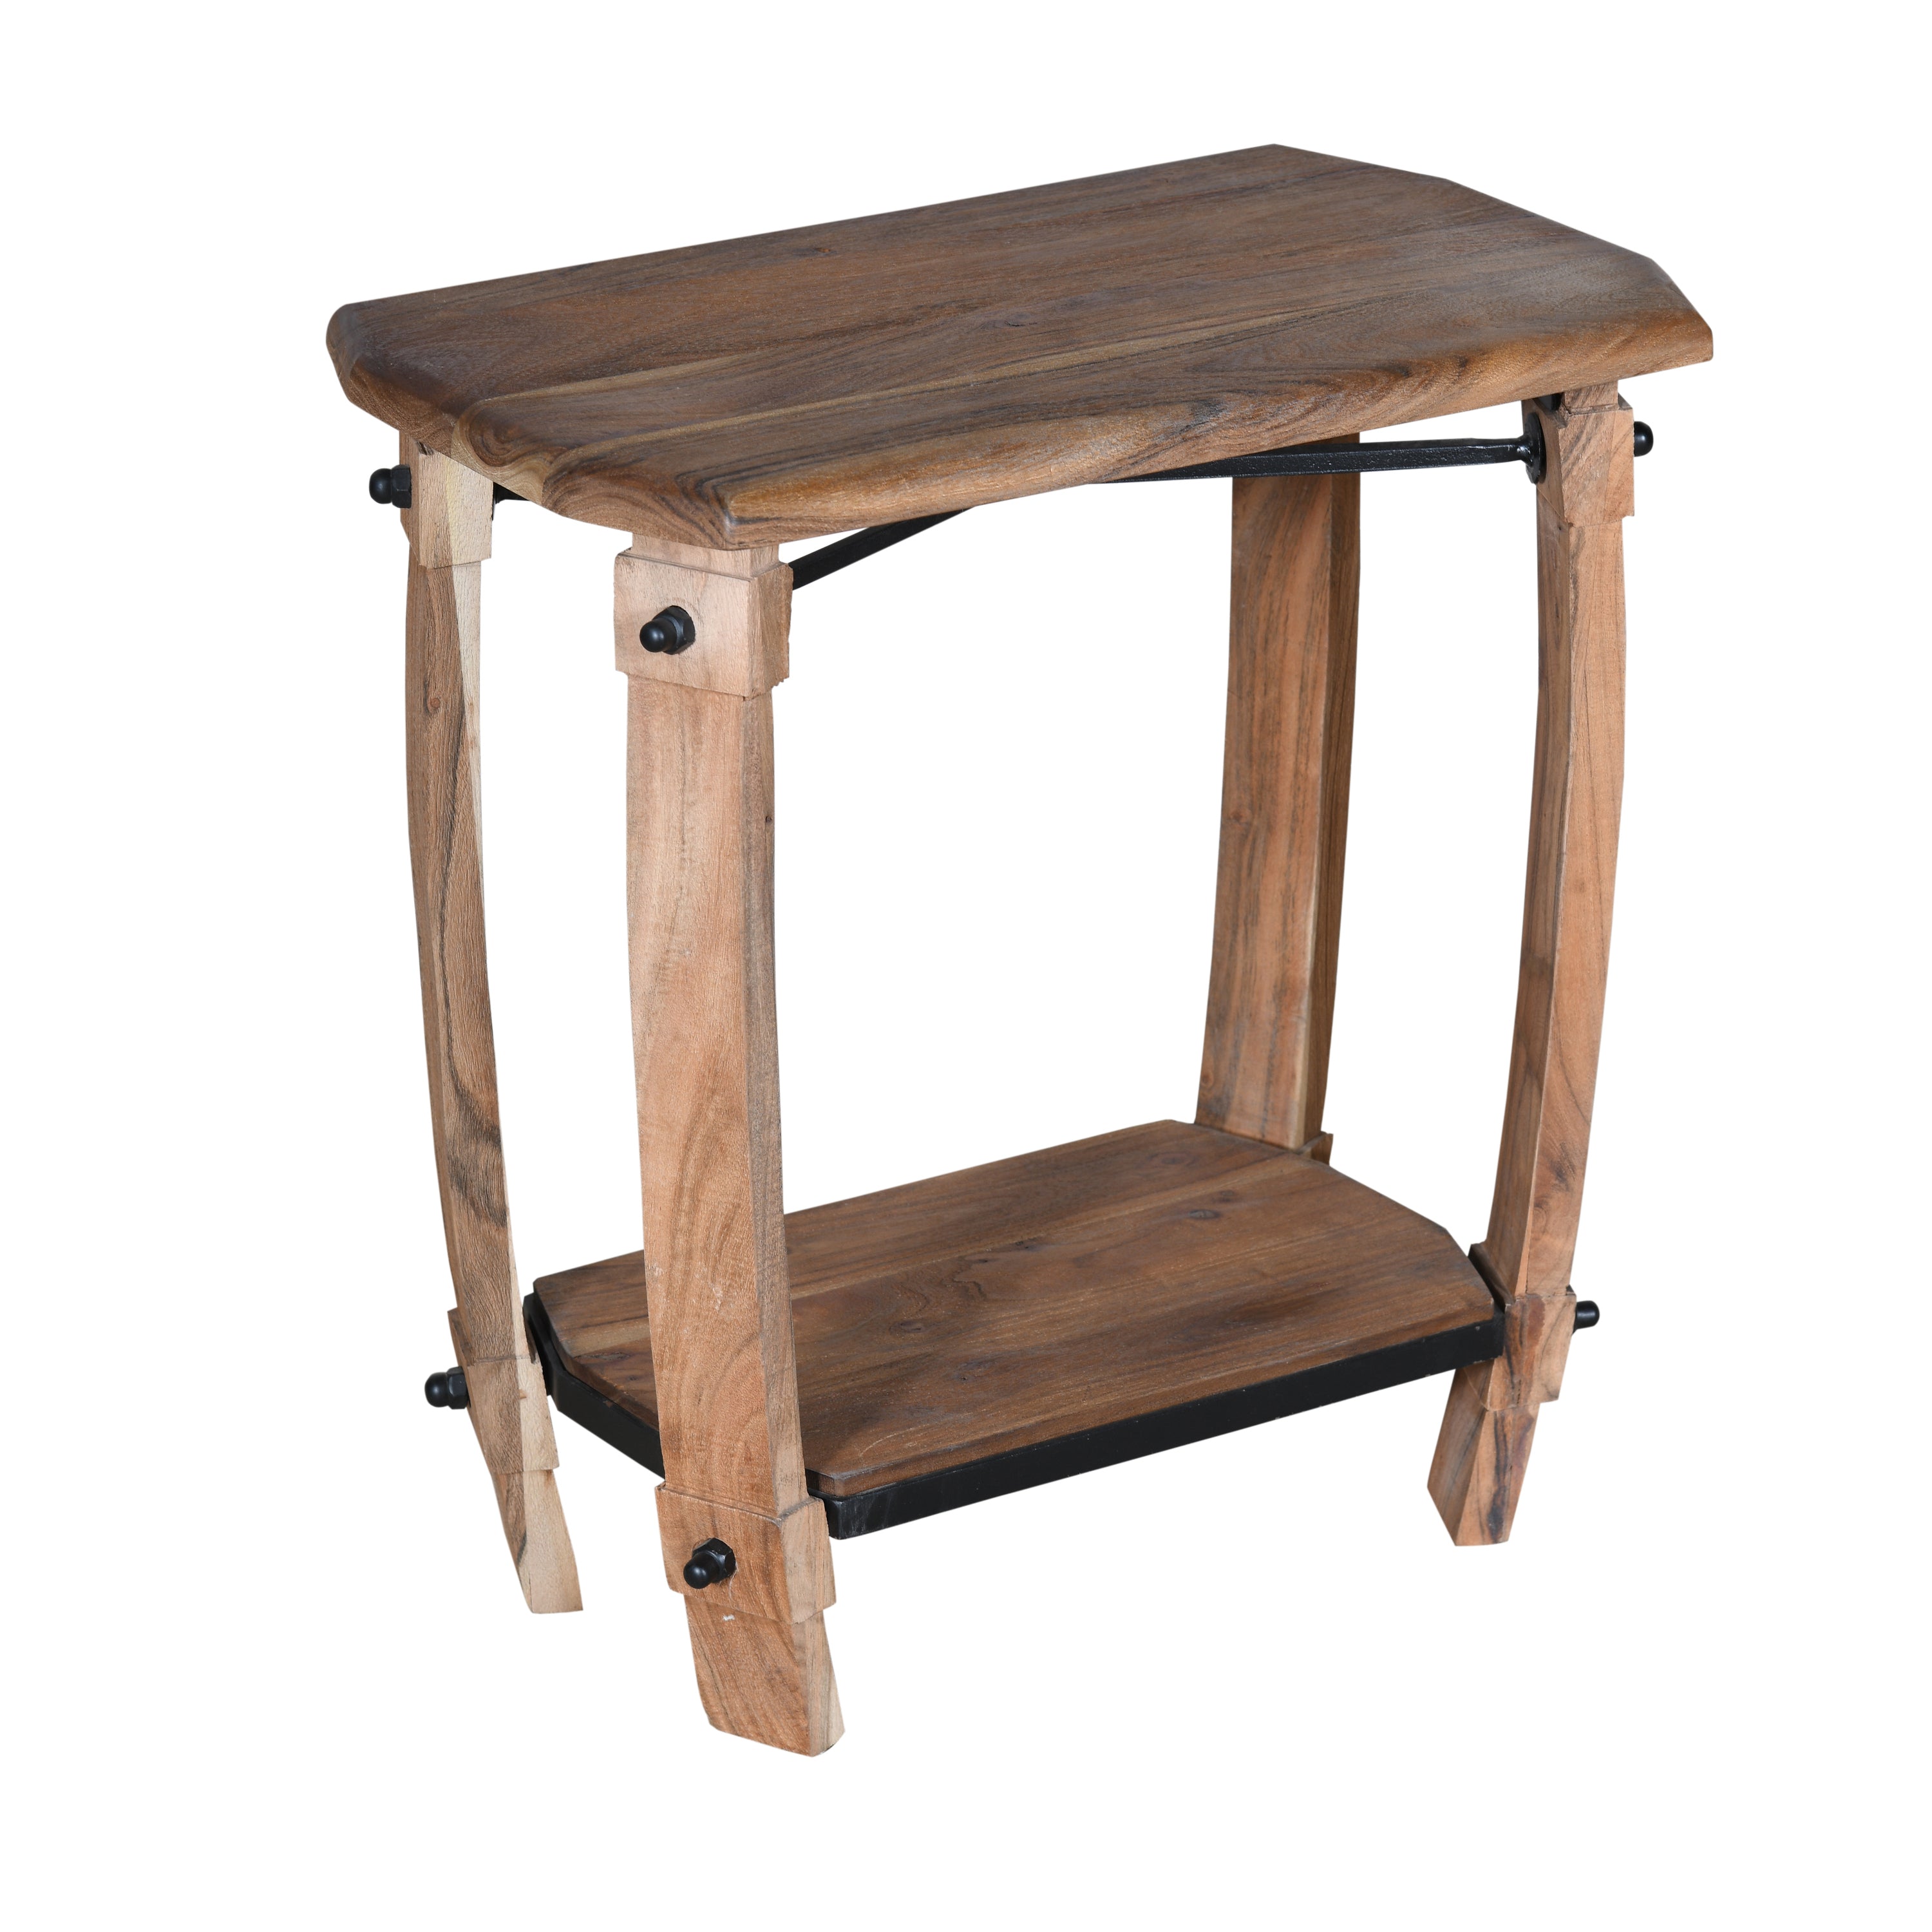 Retro Acacia Rectangular Wood Accent Table with Shelf Brown